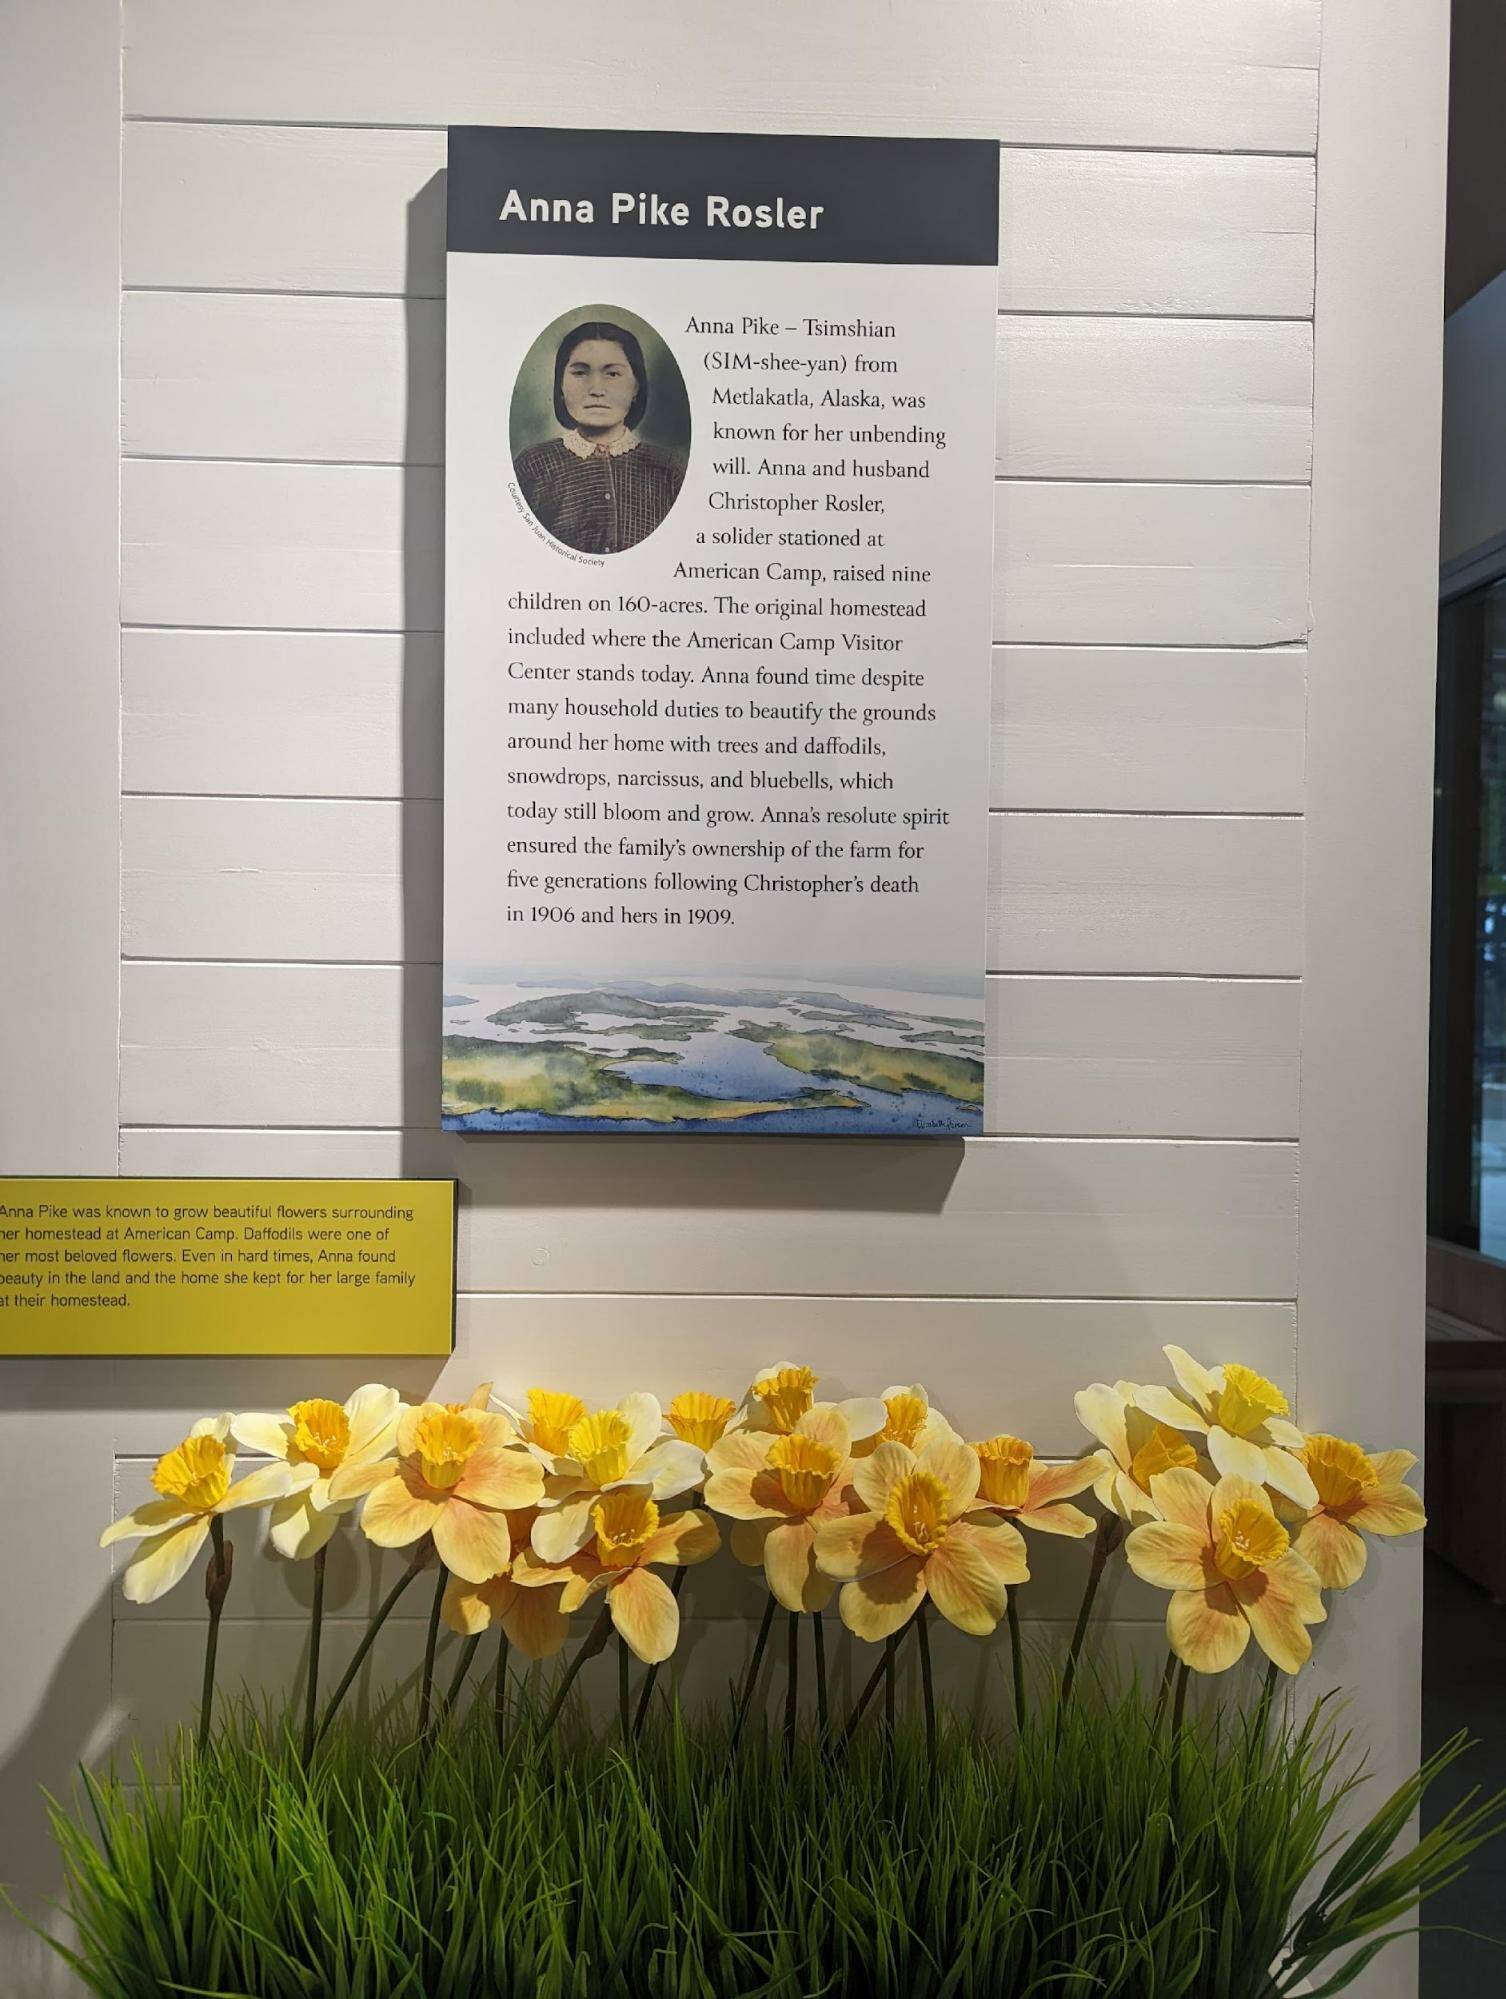 Contributed photo by the San Juan Island National Park Service
Our new visitor center is located on the former homestead of the Pike/Rosler family. Our Visitor Center displays tells the story of this multiracial family.